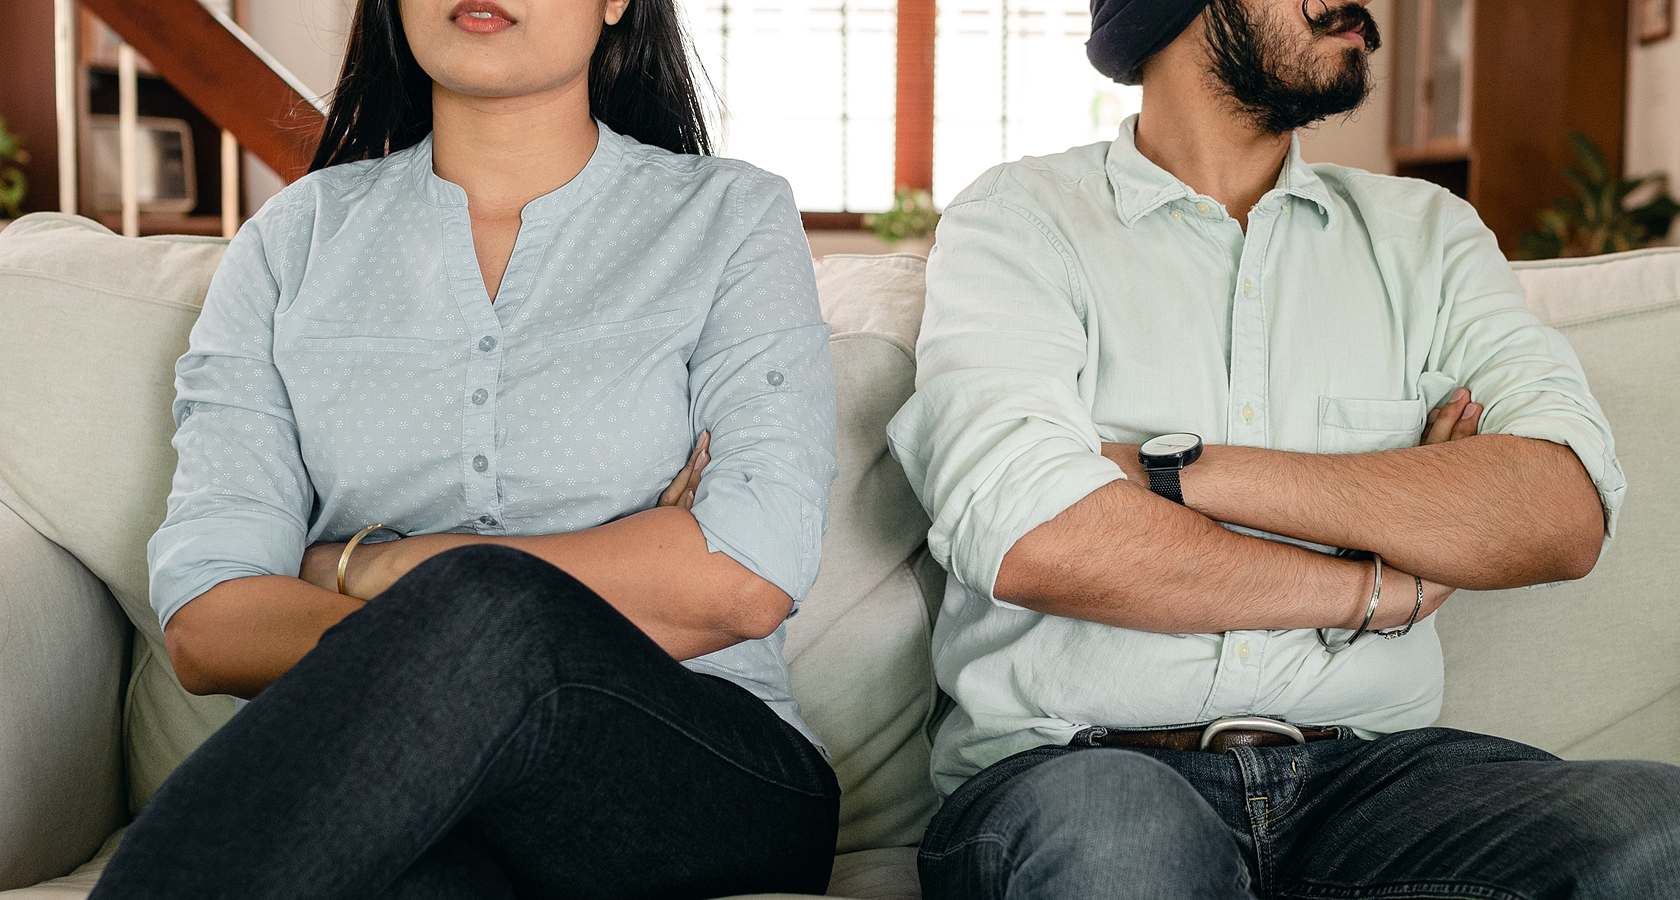 6 Tips for Getting Control of your Anger During a Conflict